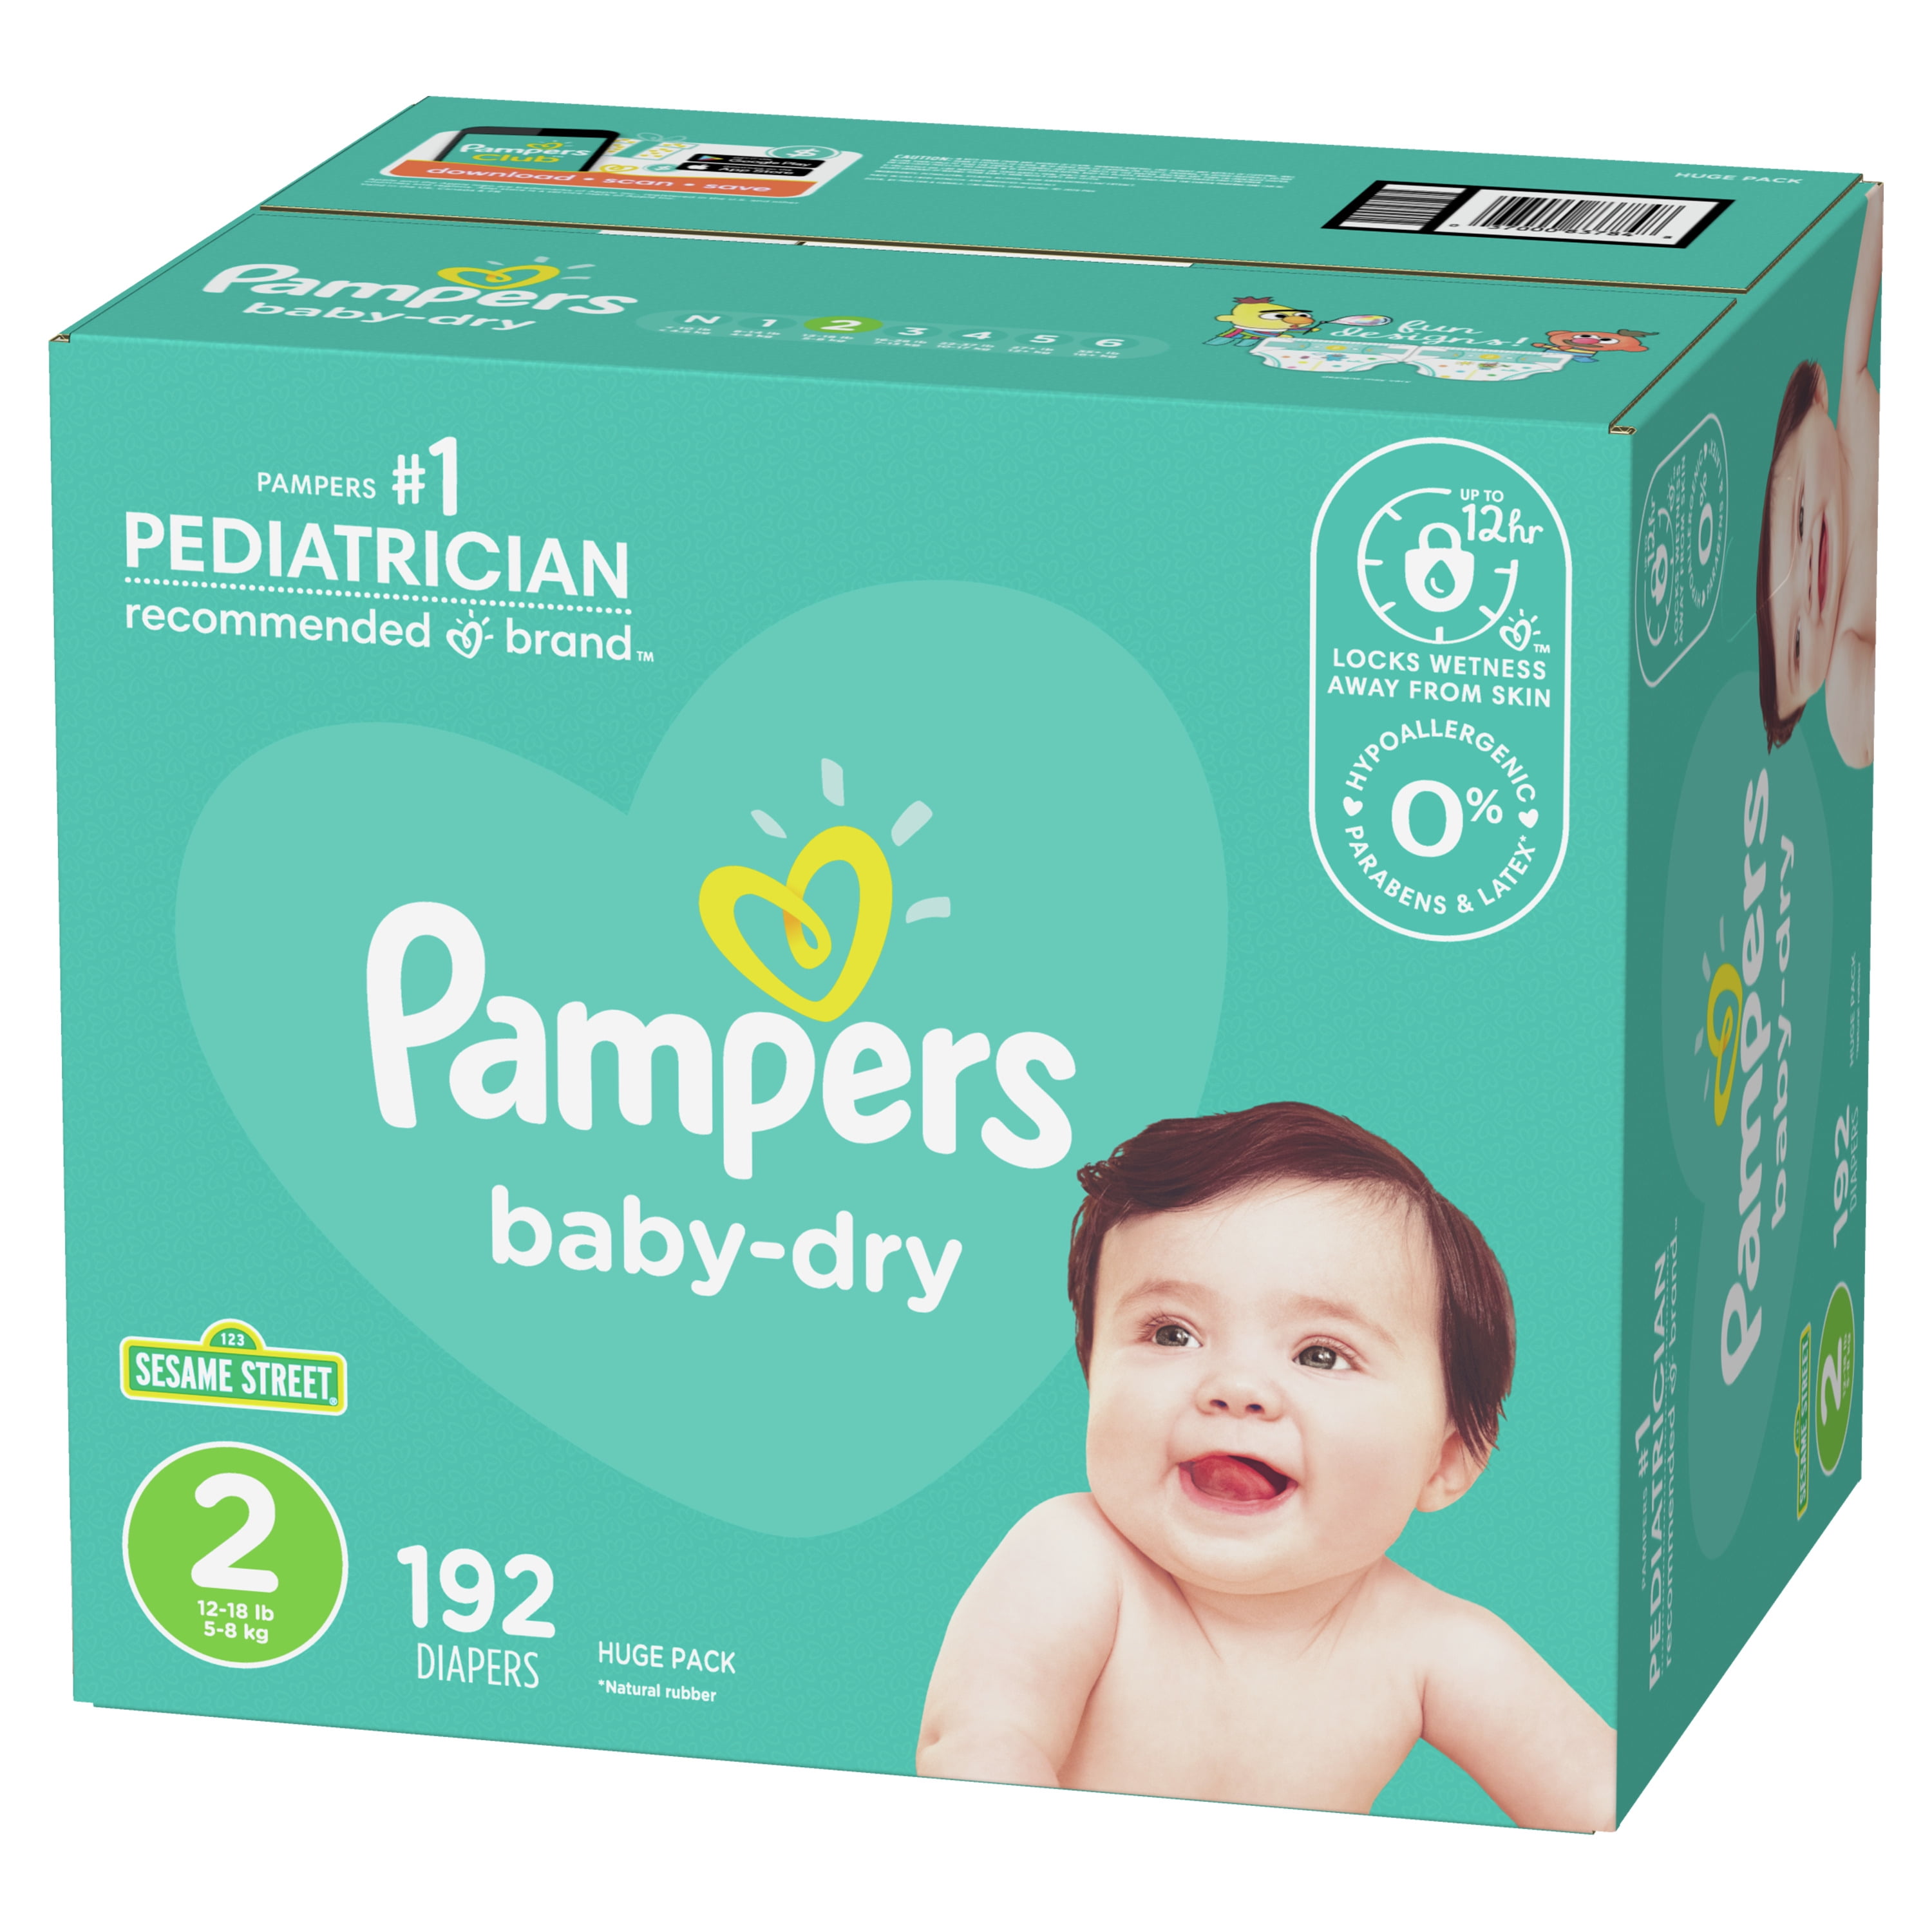 Pampers New Baby Premium Protection 31 Couches Taille 2 (3-6 kg)